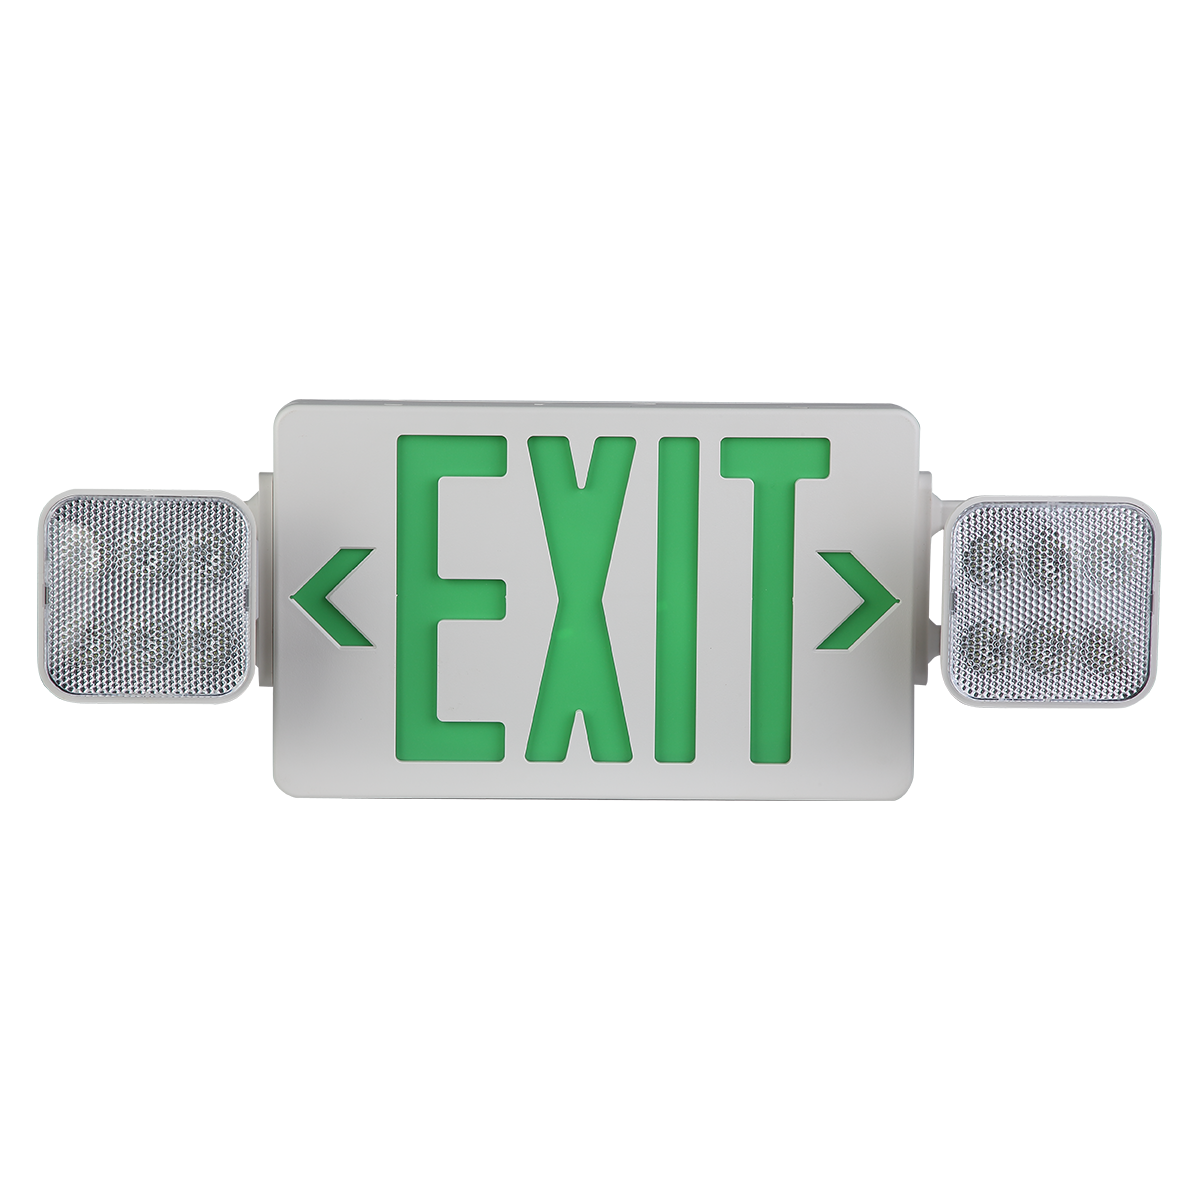 LED Combo Exit Sign Emergency Light with Battery Backup - Green